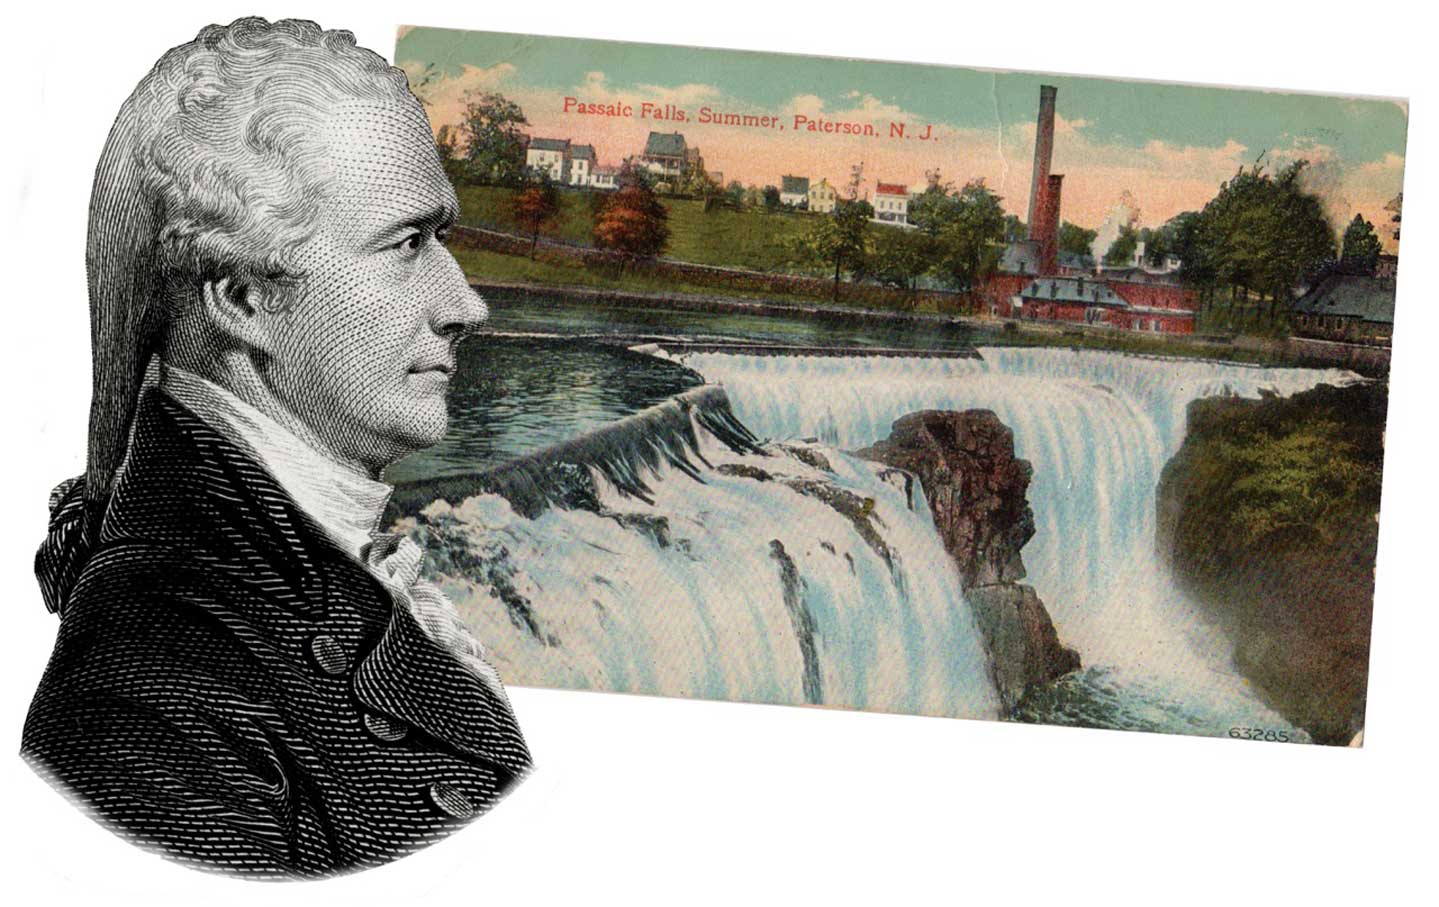 Forget the Musical—Alexander Hamilton’s Real Legacy Is the Poverty-Stricken City He Founded